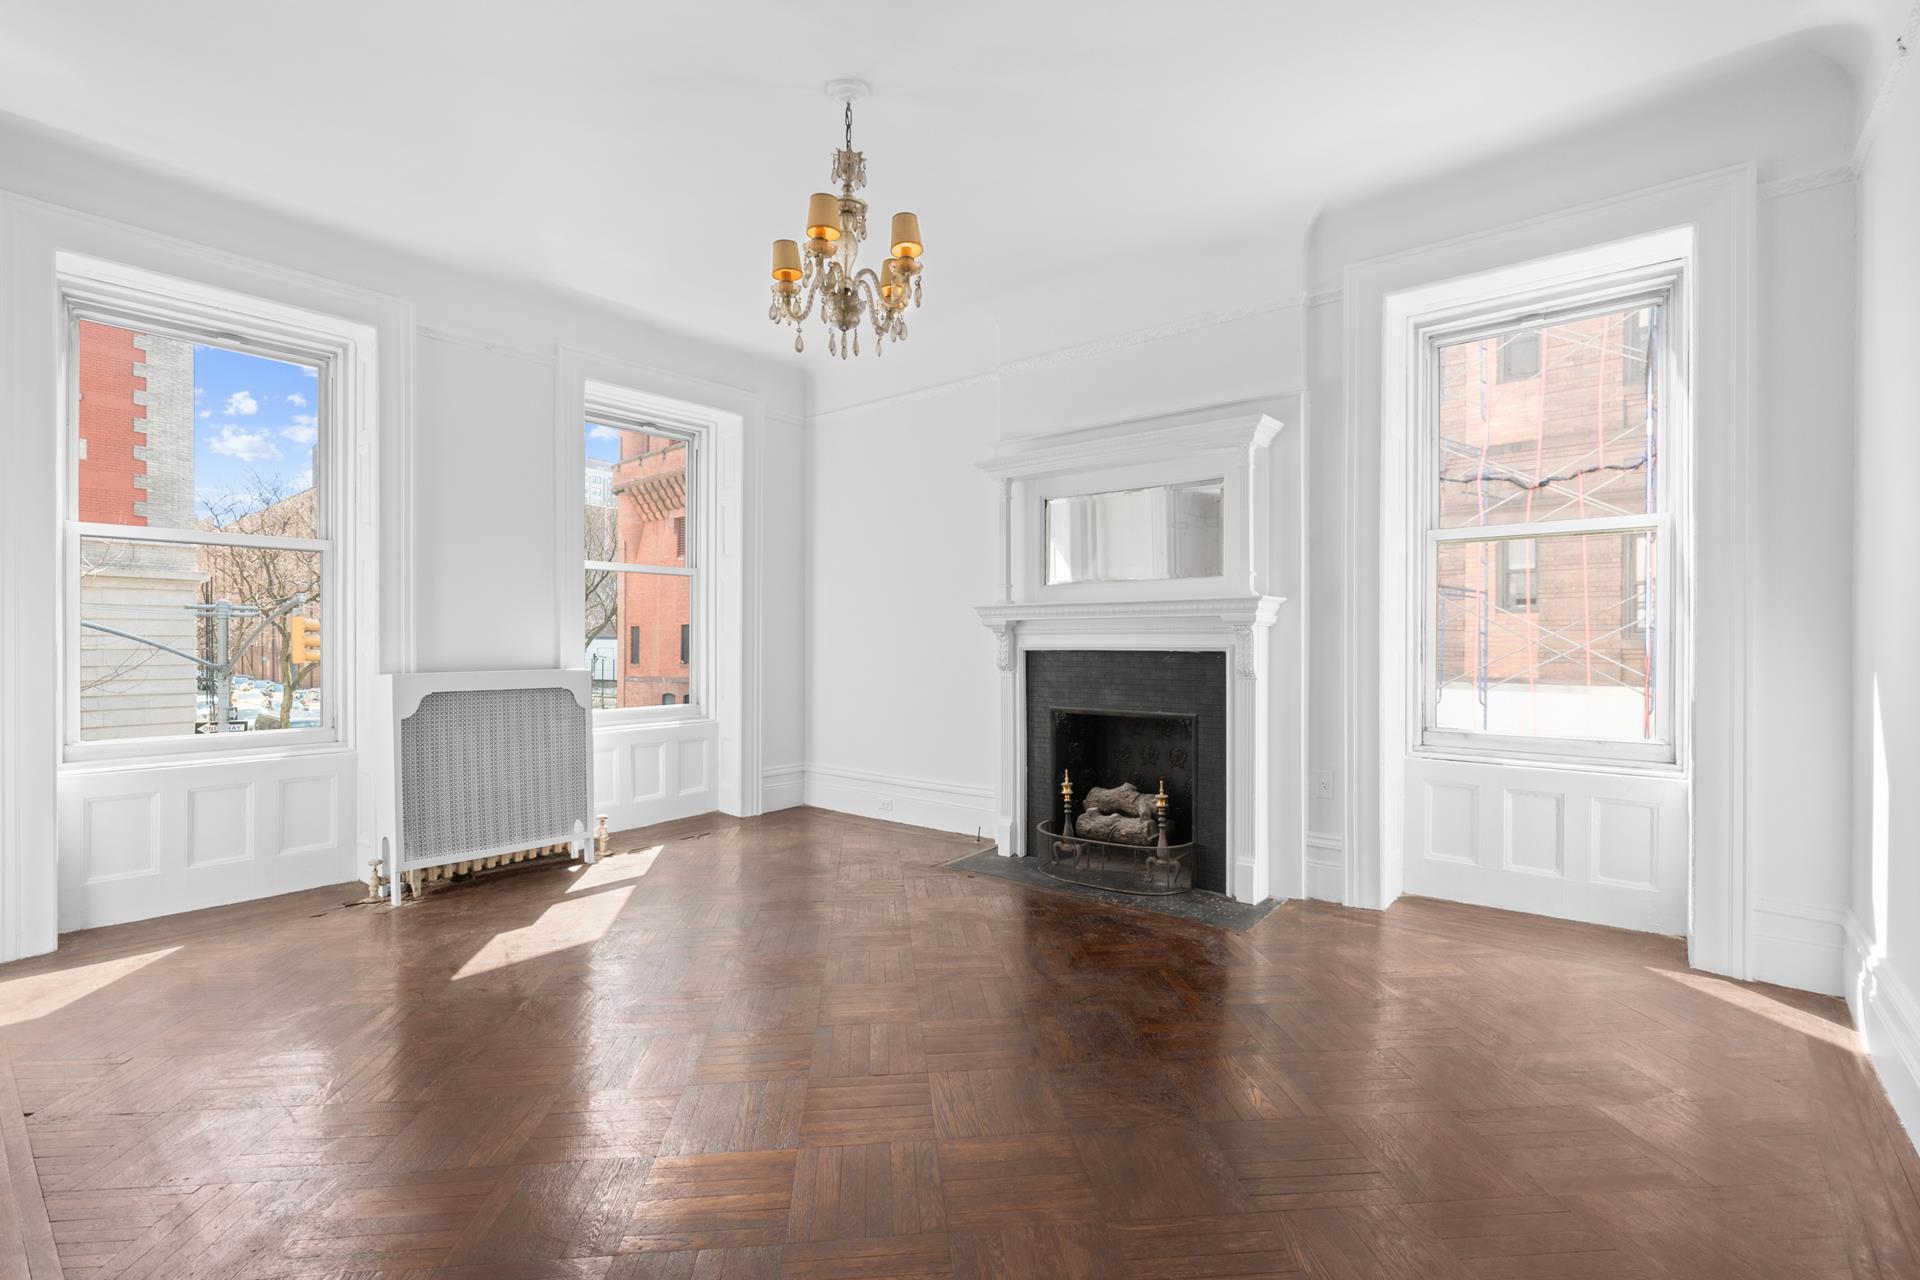 27 East 95th Street 2E, Carnegie Hill, Upper East Side, NYC - 3 Bedrooms  
2 Bathrooms  
8 Rooms - 